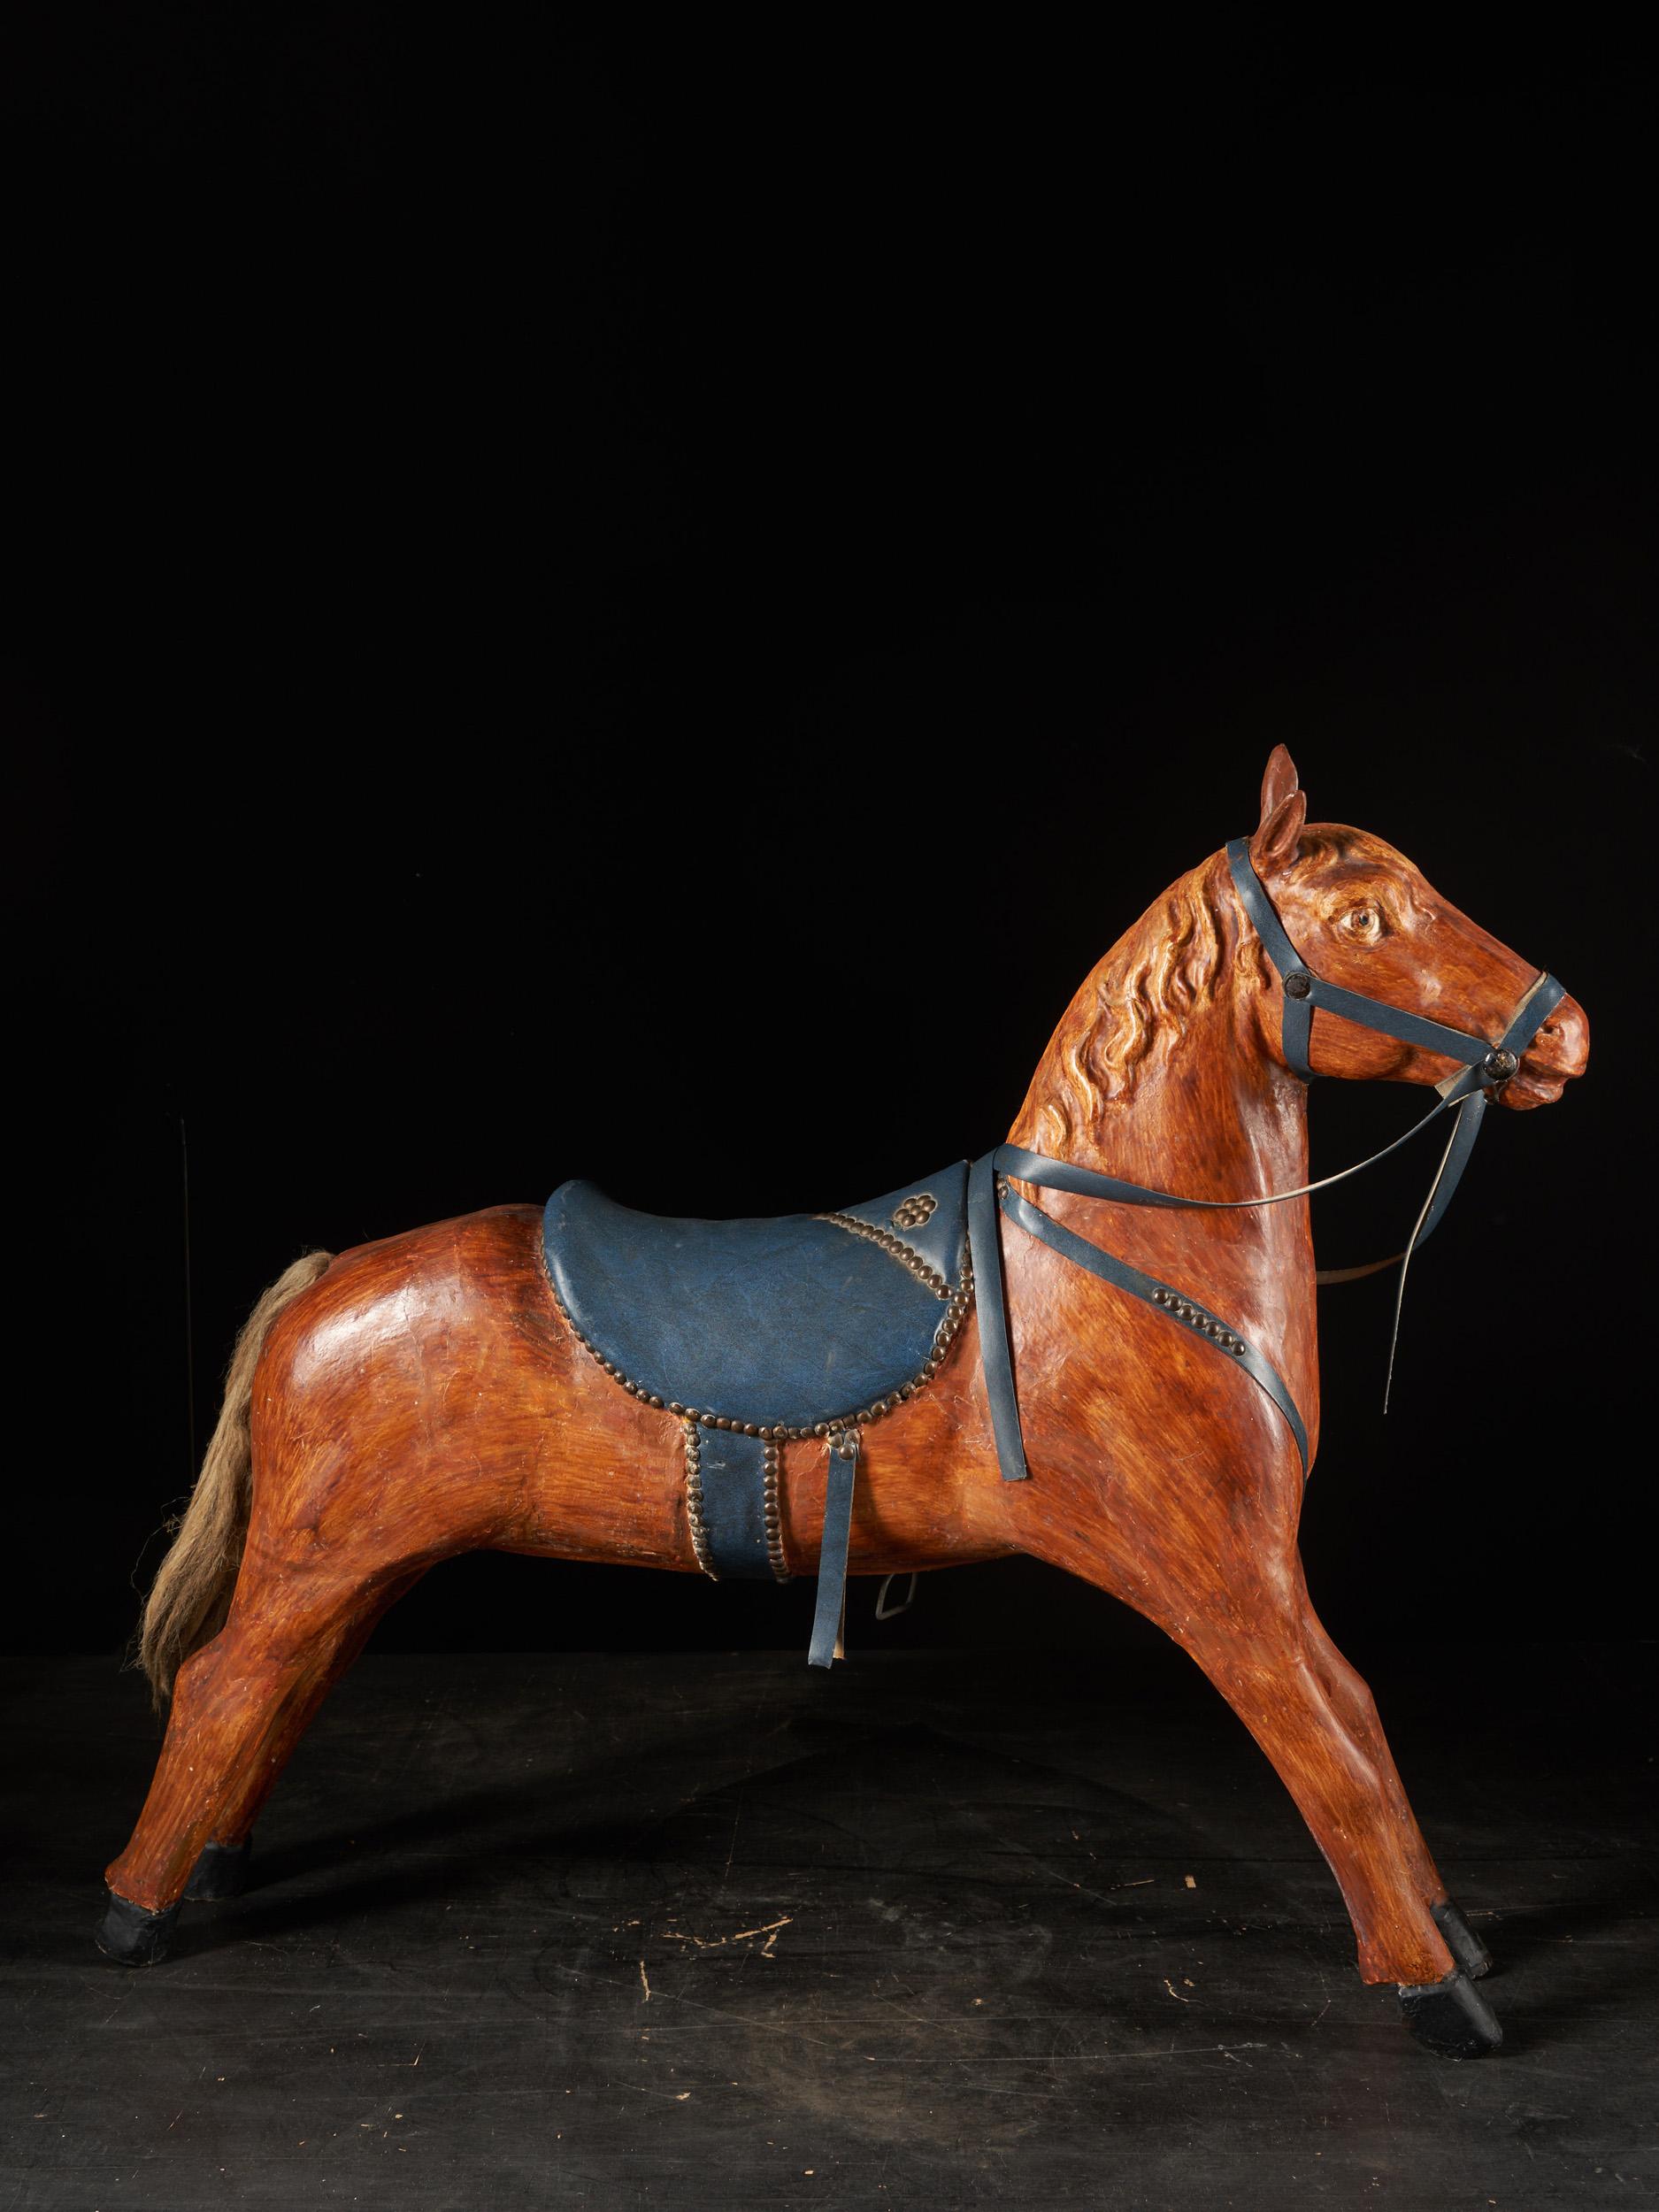 Painted wood and saddlery in artificial leather fixed with copper decorative nails.